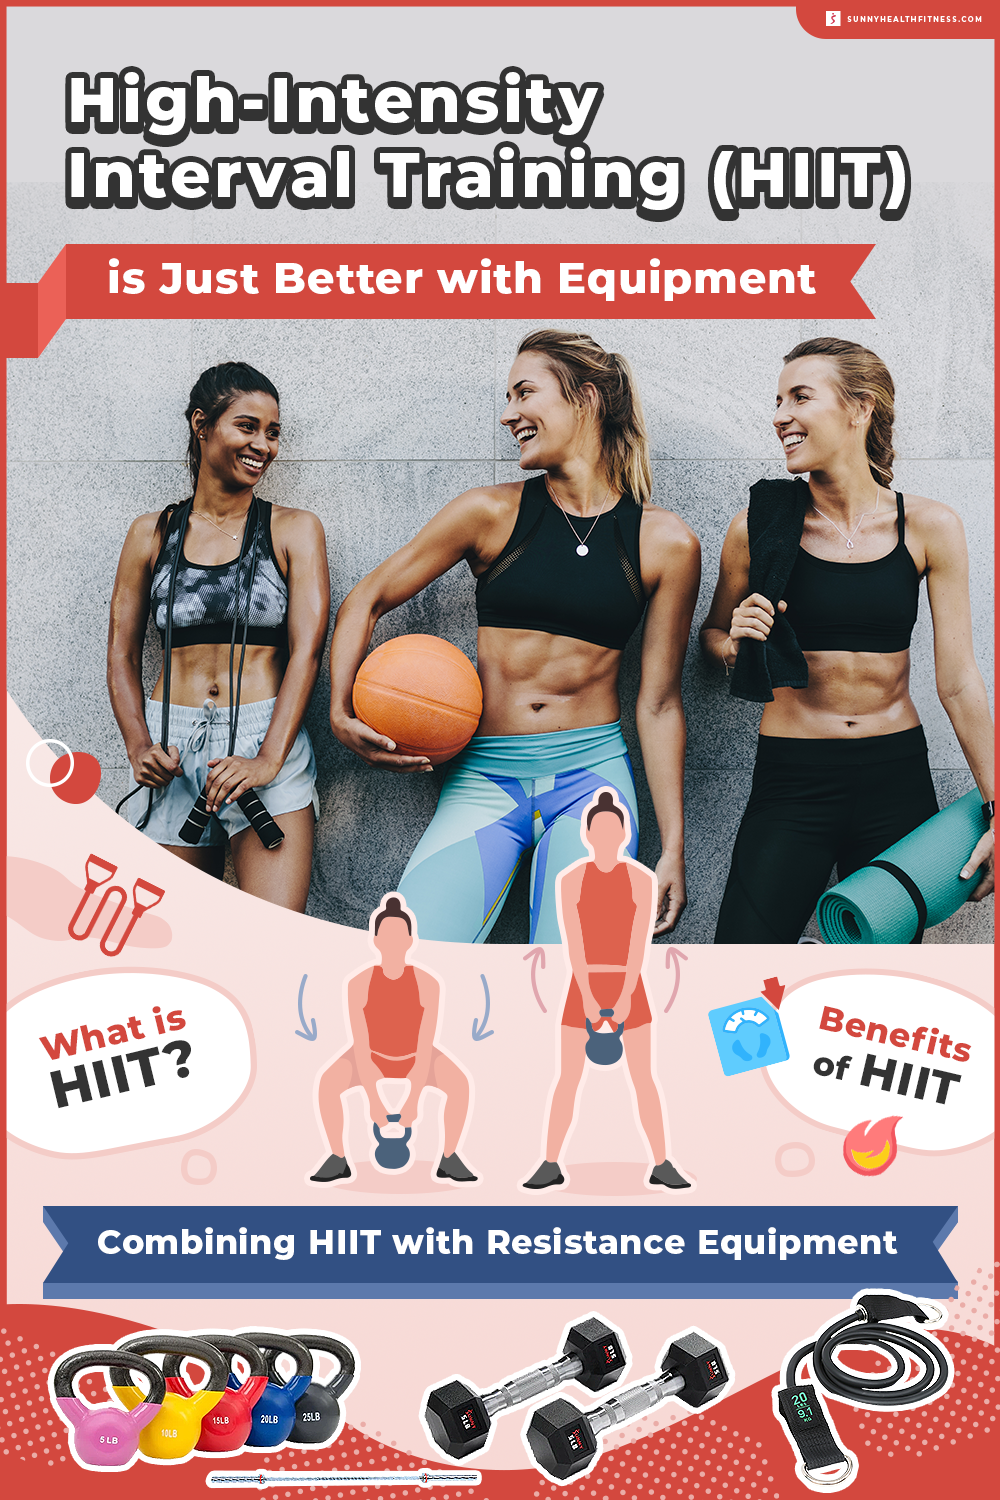 High-Intensity Interval Training is Just Better with Equipment Infographic